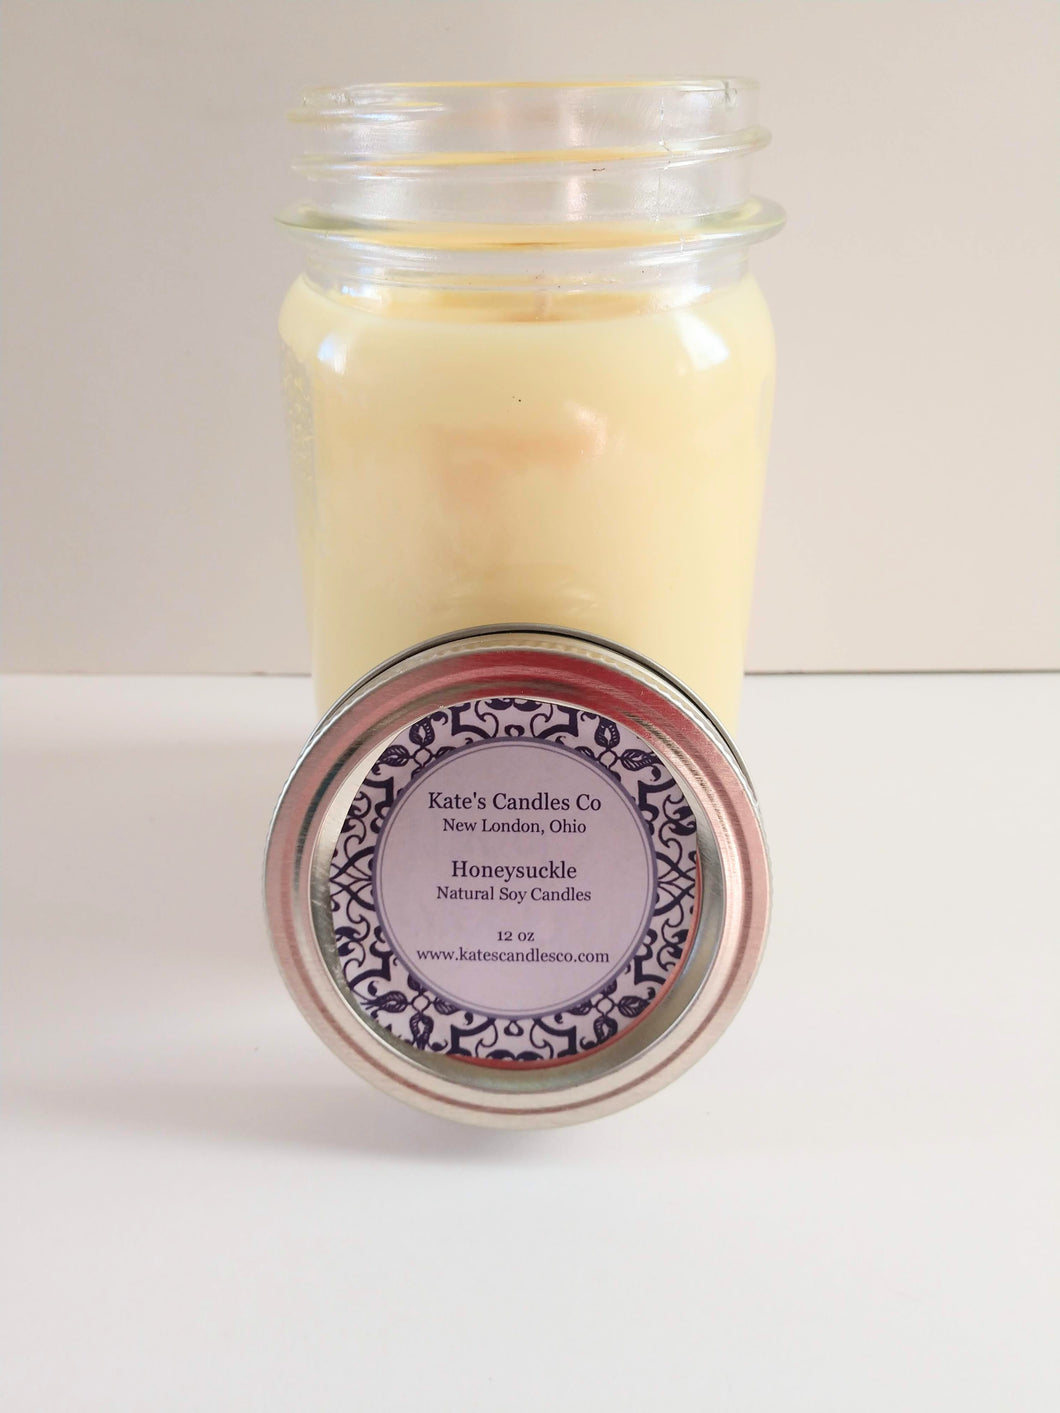 Honeysuckle Soy Candles - Kate's Candles Co.